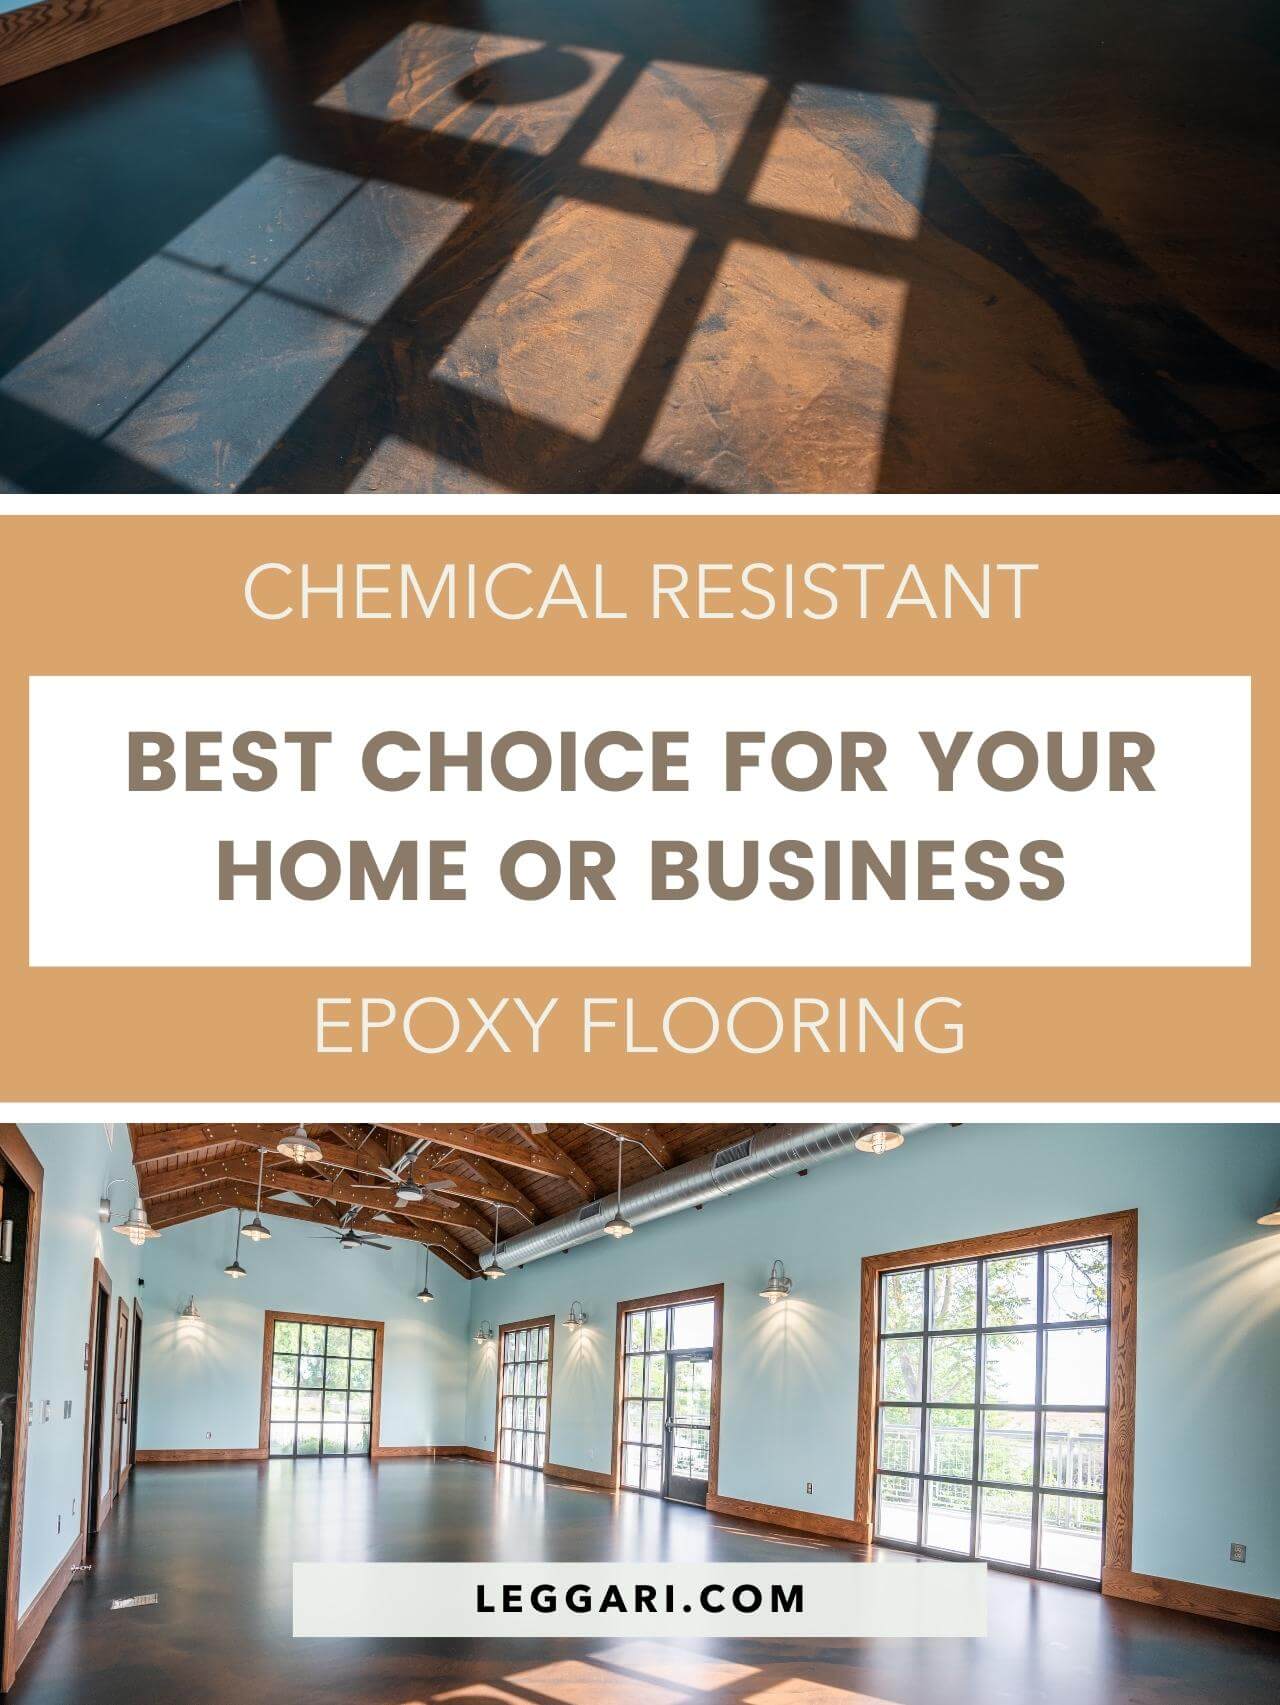 Chemical resistant epoxy flooring - the best choose for your home or business